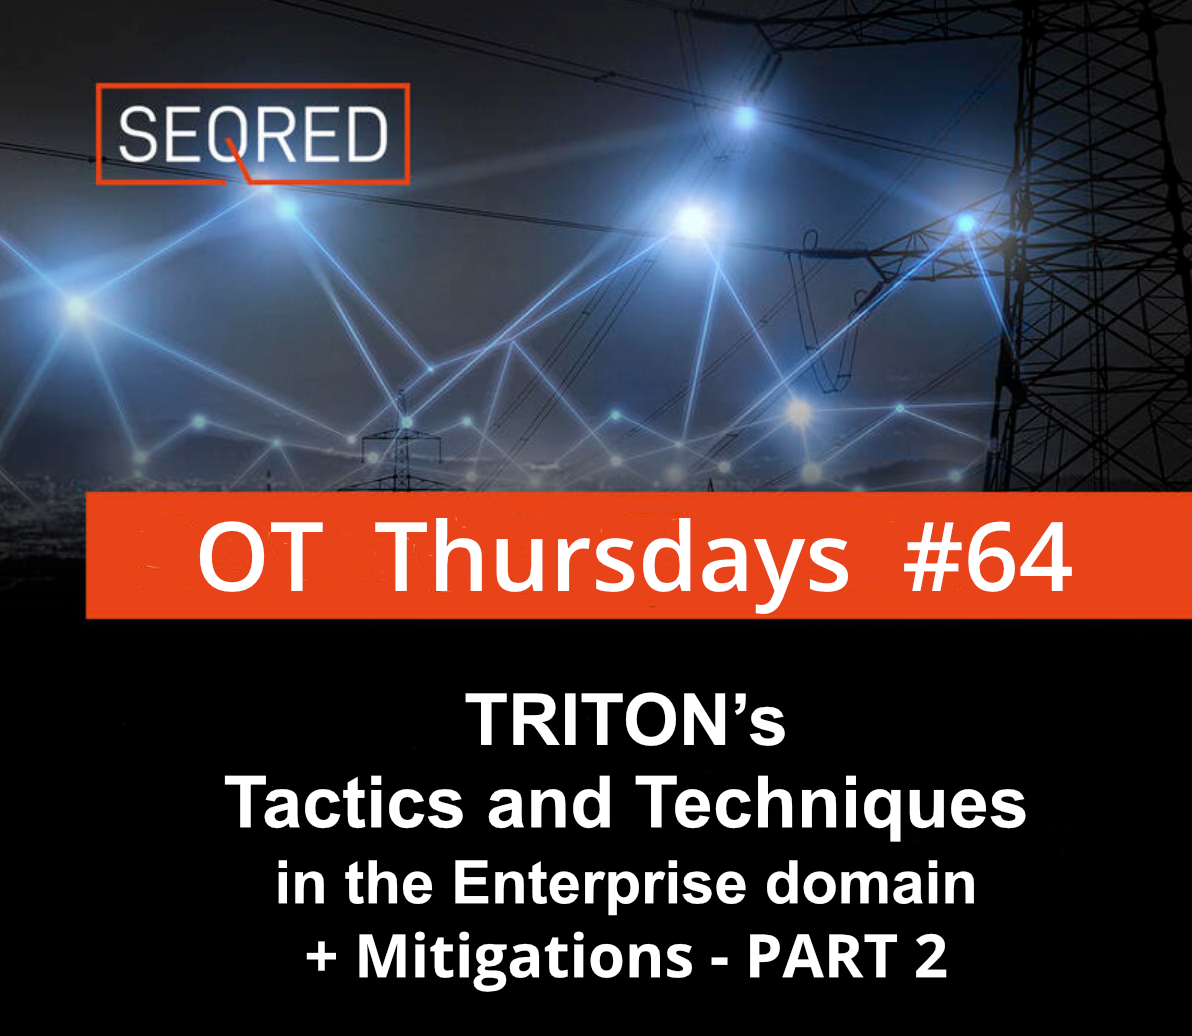 TRITON's Tactics and Technics in the Enterprise domain with Mitigations